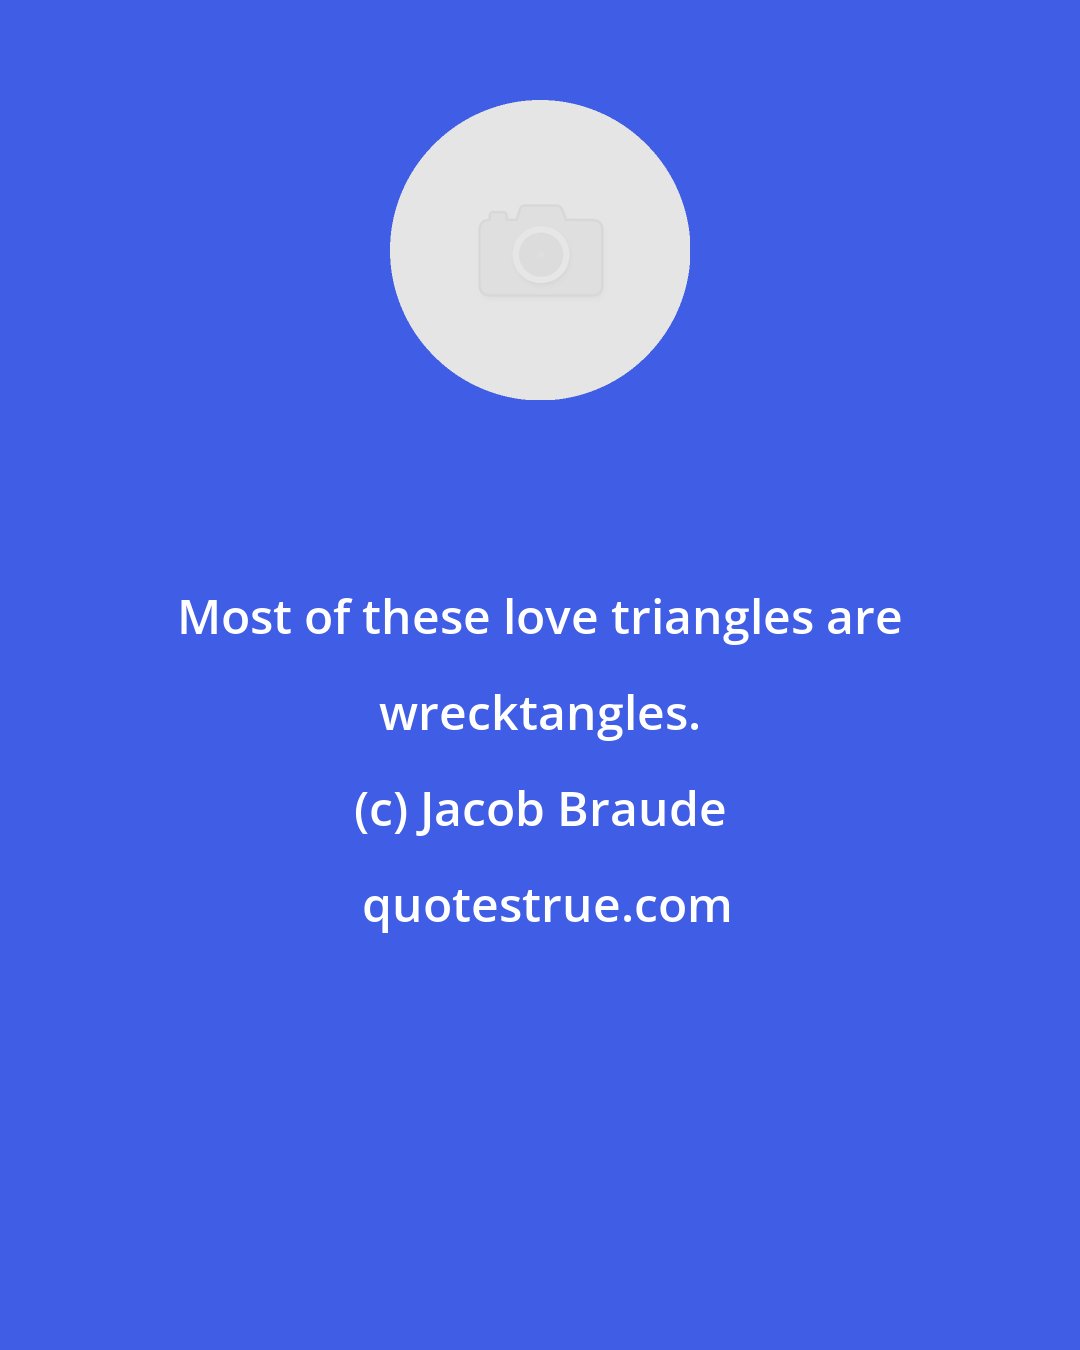 Jacob Braude: Most of these love triangles are wrecktangles.